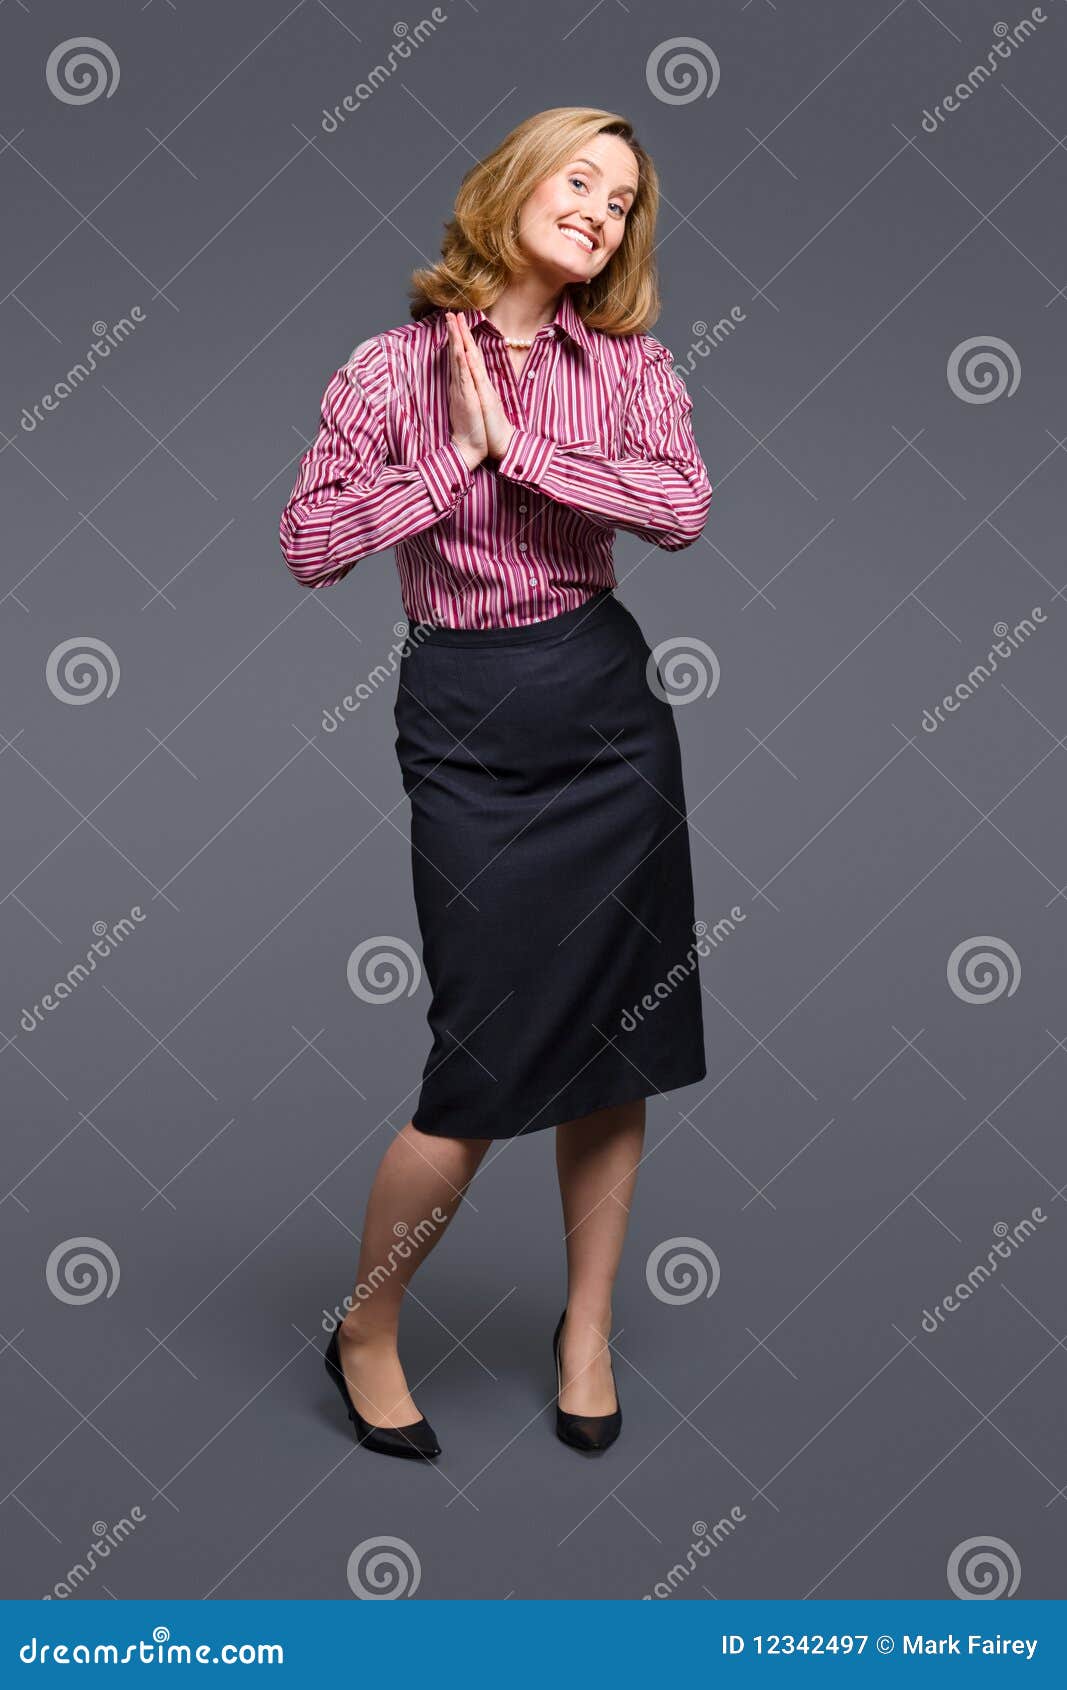 enthusiastic woman standing